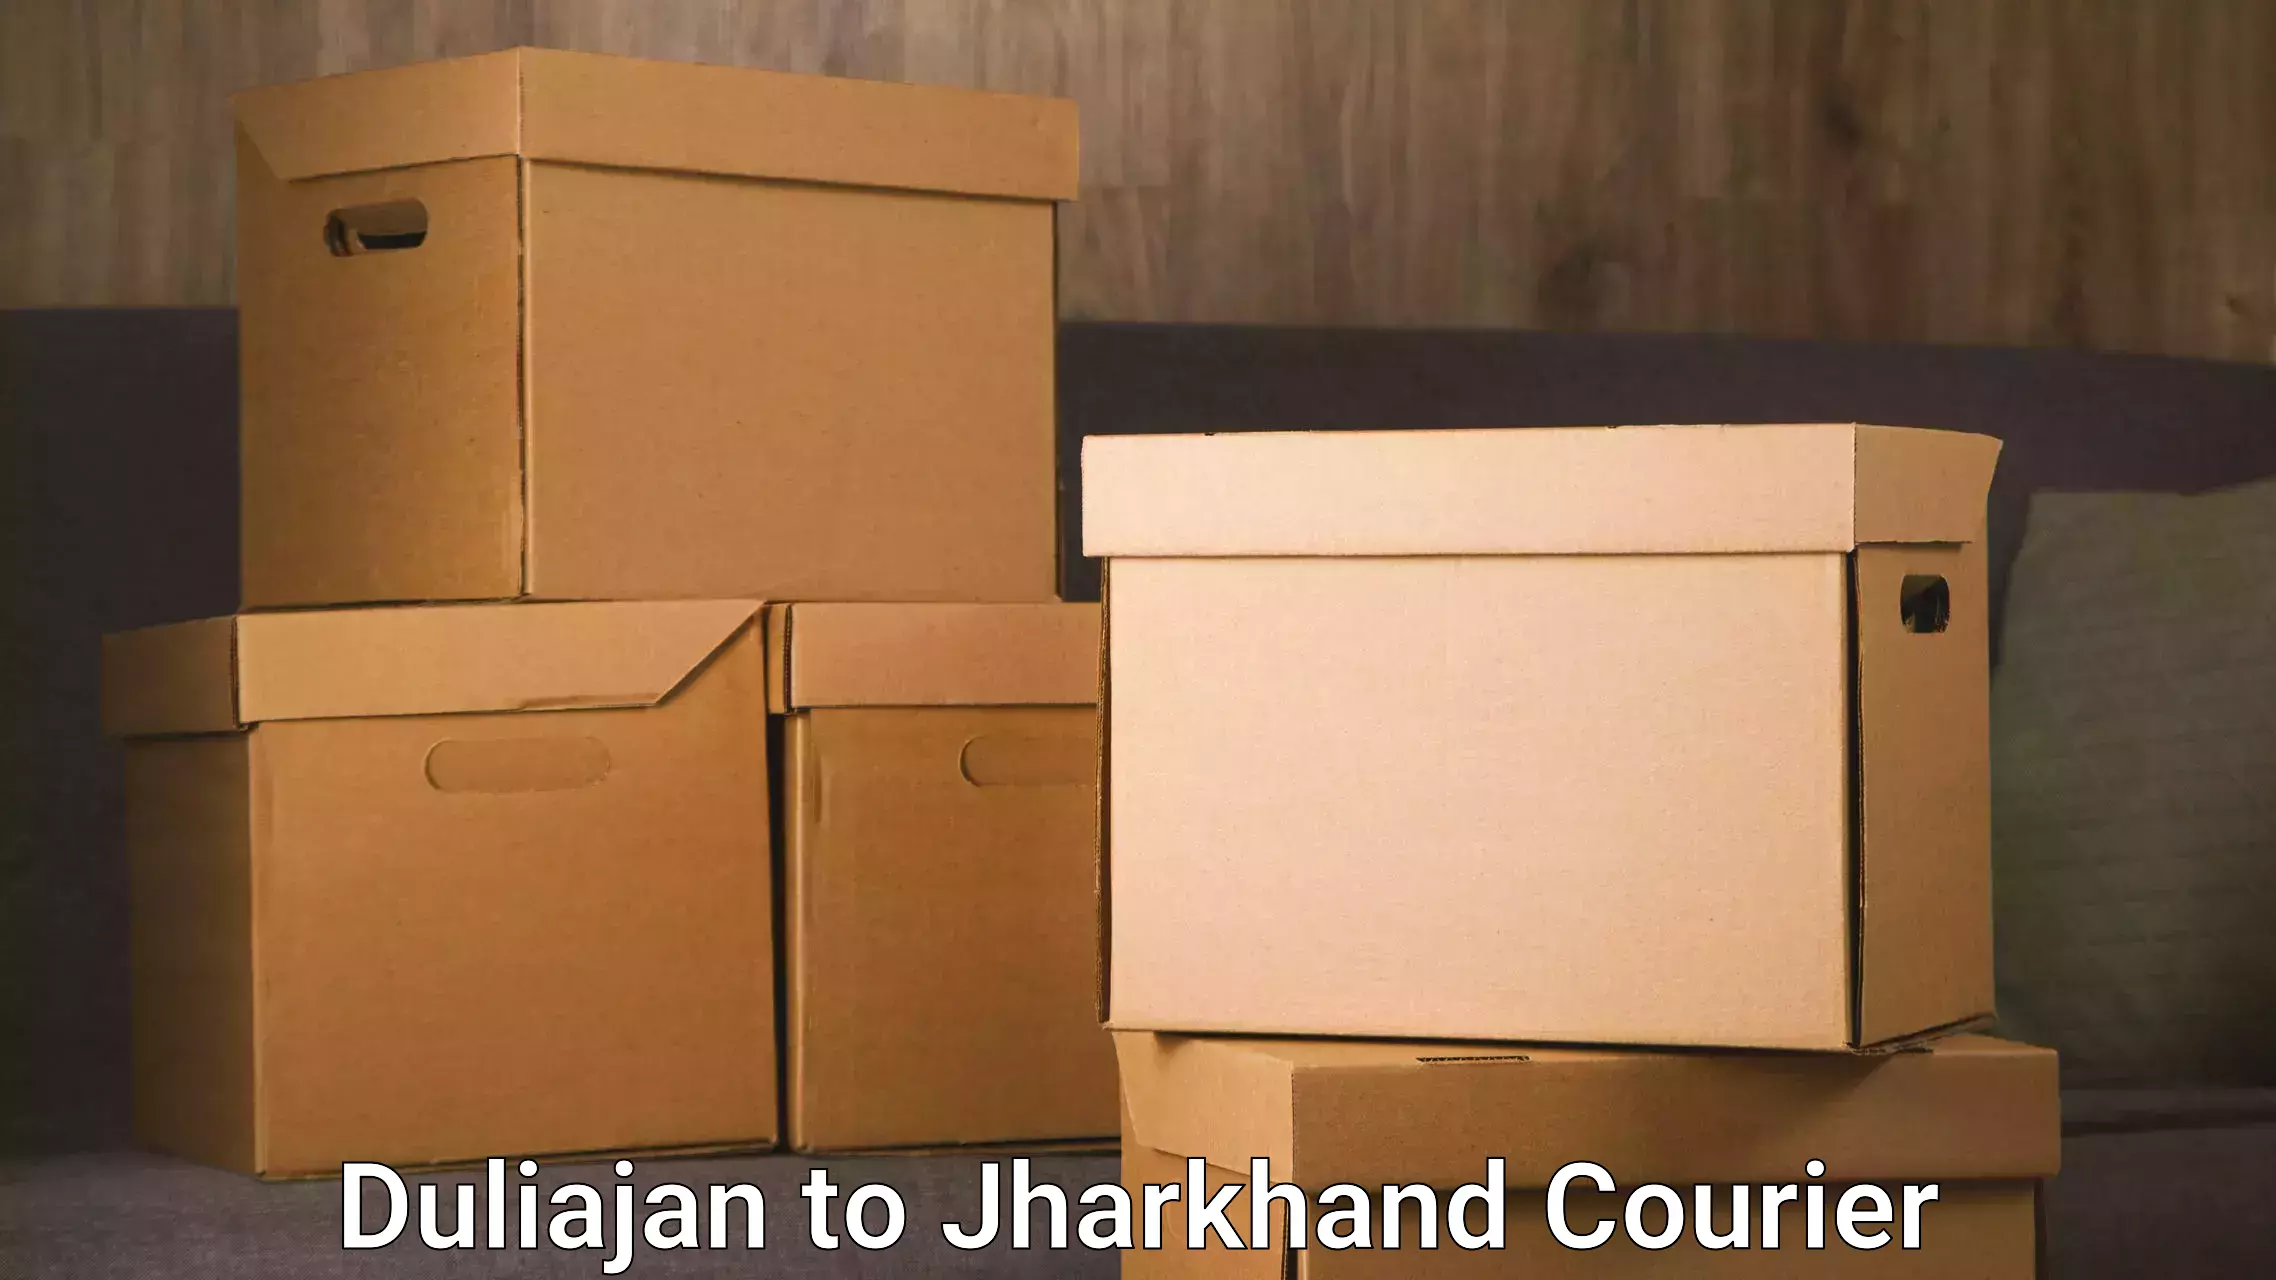 Subscription-based courier Duliajan to Jharkhand